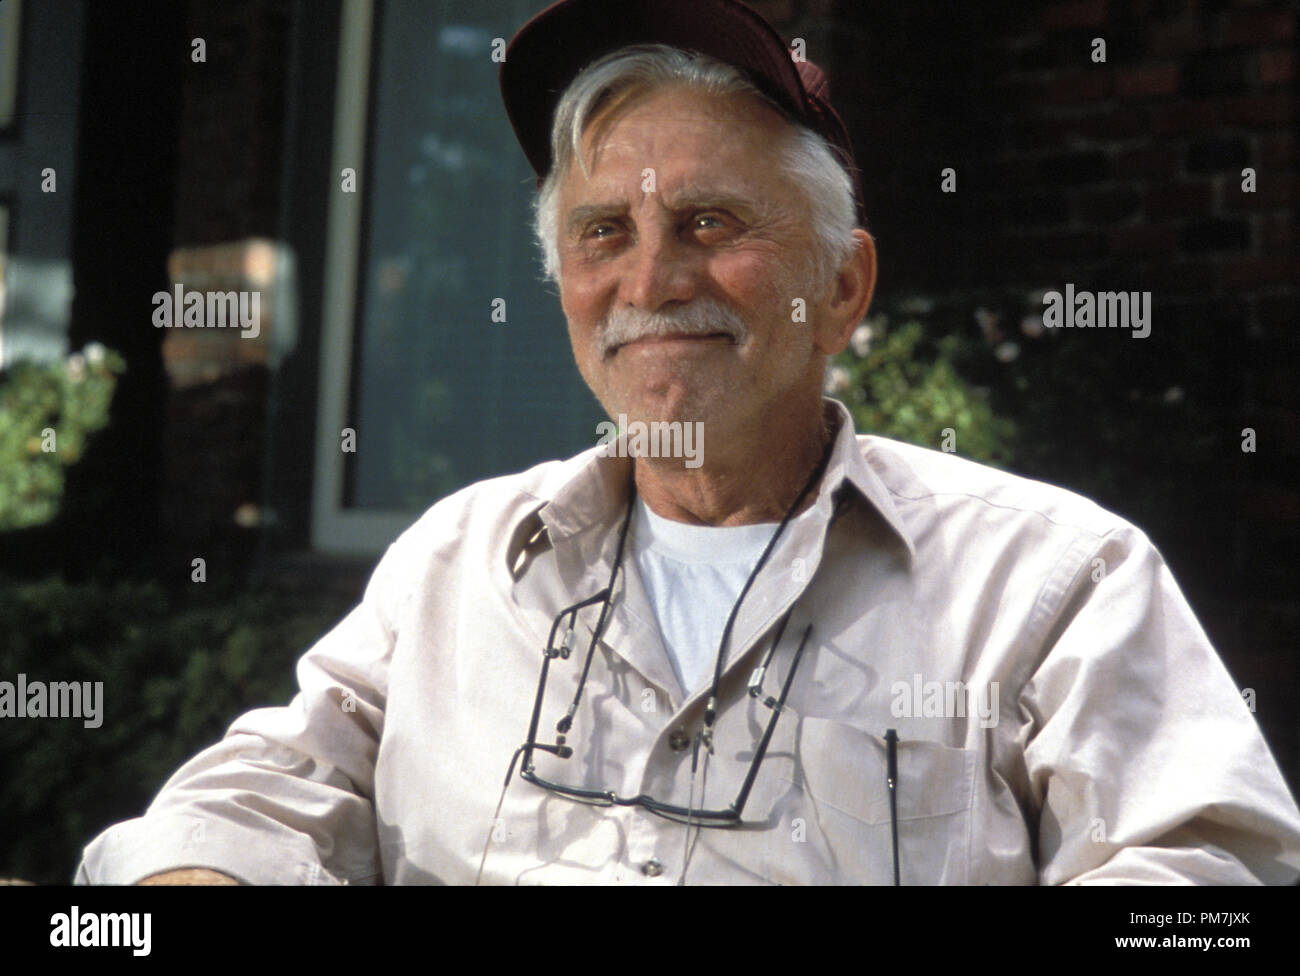 Film Still from 'Greedy' Kirk Douglas © 1994 Universal Pictures Photo Credit: Peter Iovino   File Reference # 31129351THA  For Editorial Use Only - All Rights Reserved Stock Photo